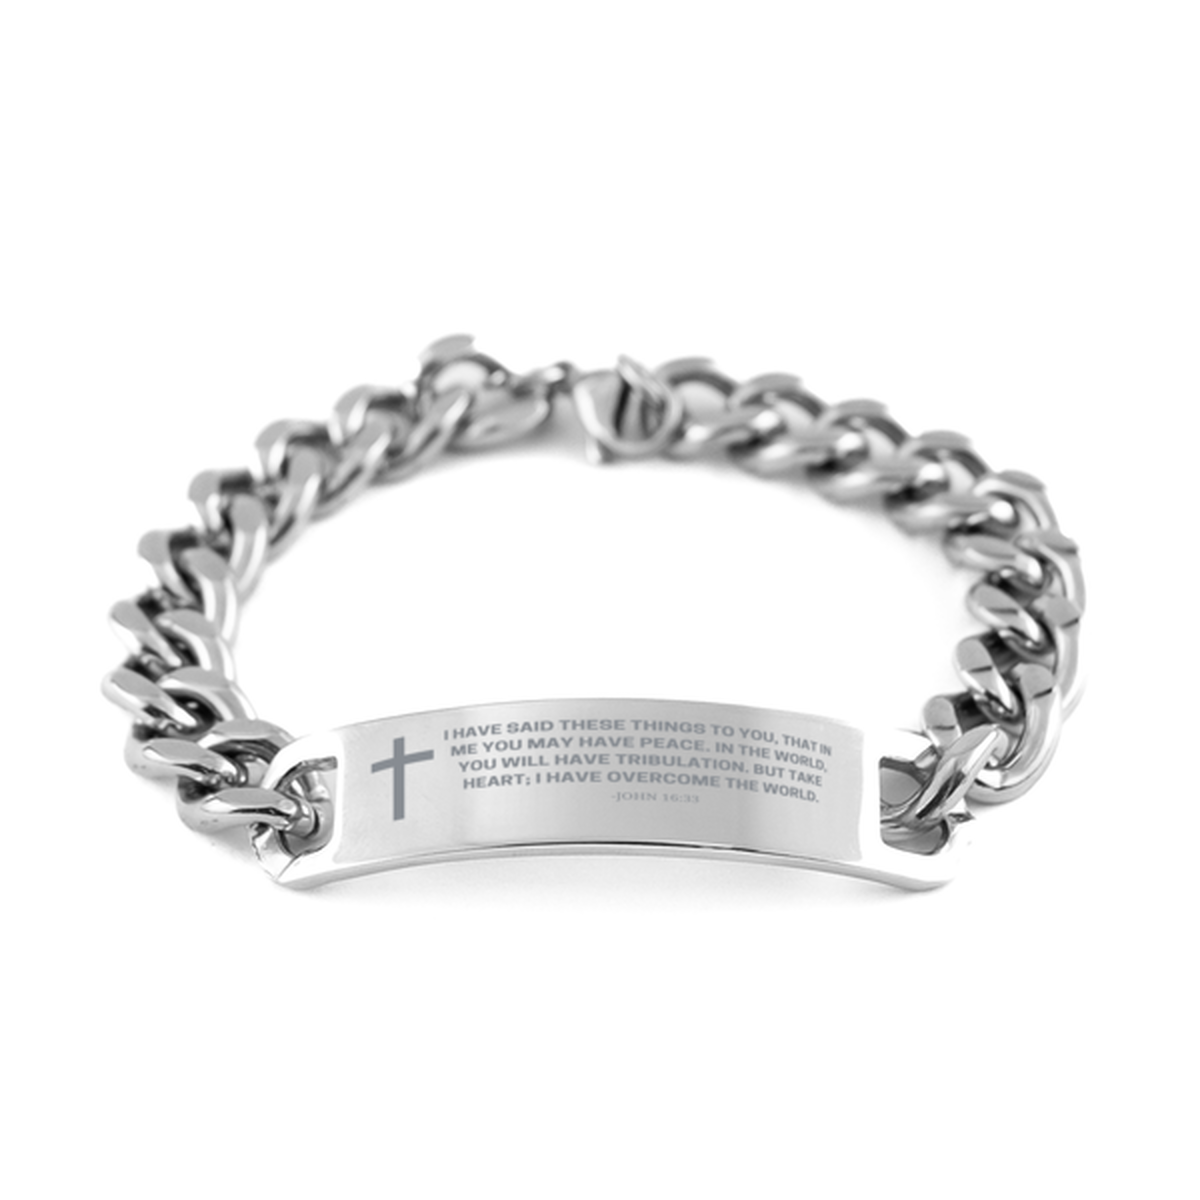 Baptism Gifts For Teenage Boys Girls, Christian Bible Verse Cuban Chain Bracelet, I have said these things, Catholic Confirmation Gifts for Son, Godson, Grandson, Nephew